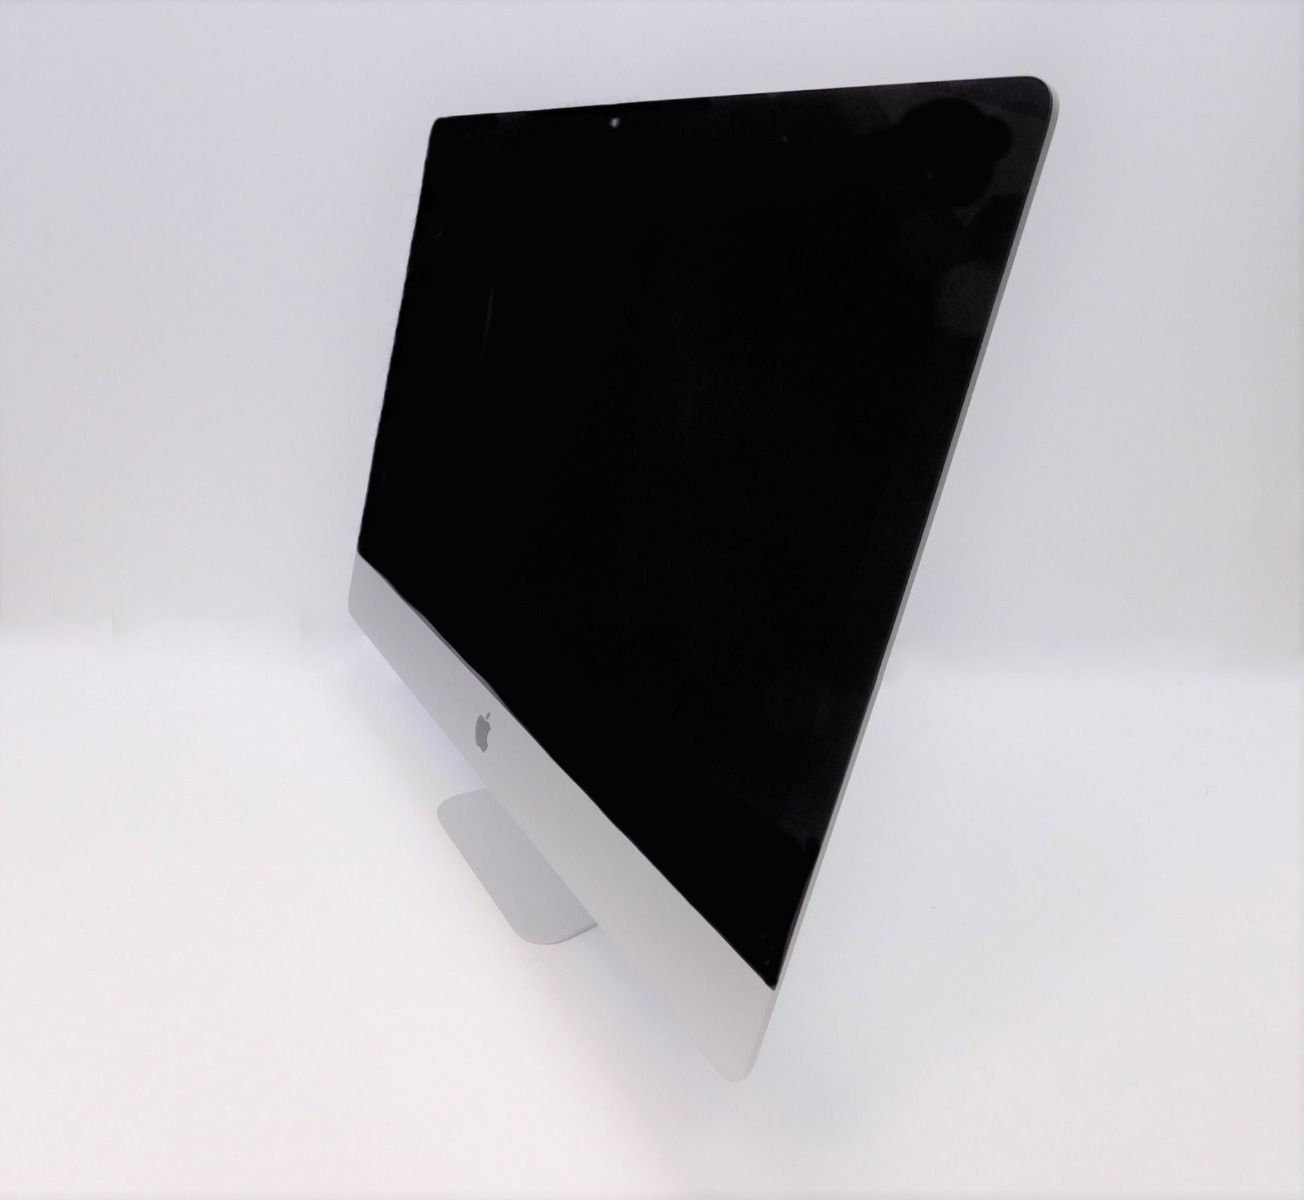 Apple iMac All-in-one A1418 21.5" Late 2015 Core i5 Turbo 2.70GHz 8GB 1TB HDD